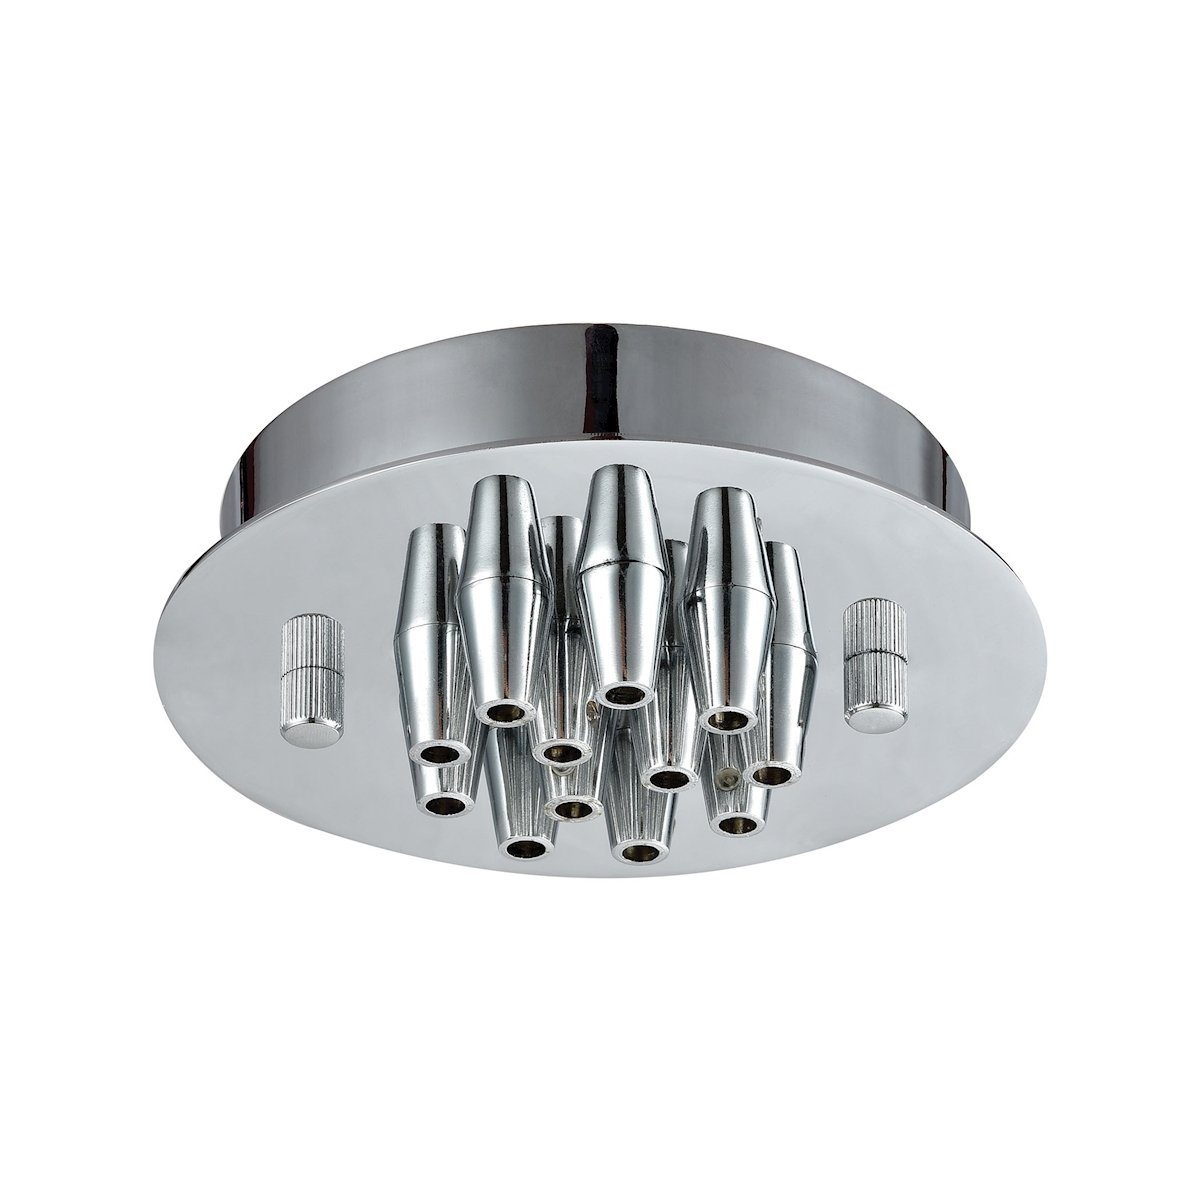 Illuminaire Accessories 12 Light Small Round Canopy In Polished Chrome Parts/Hardware Elk Lighting 